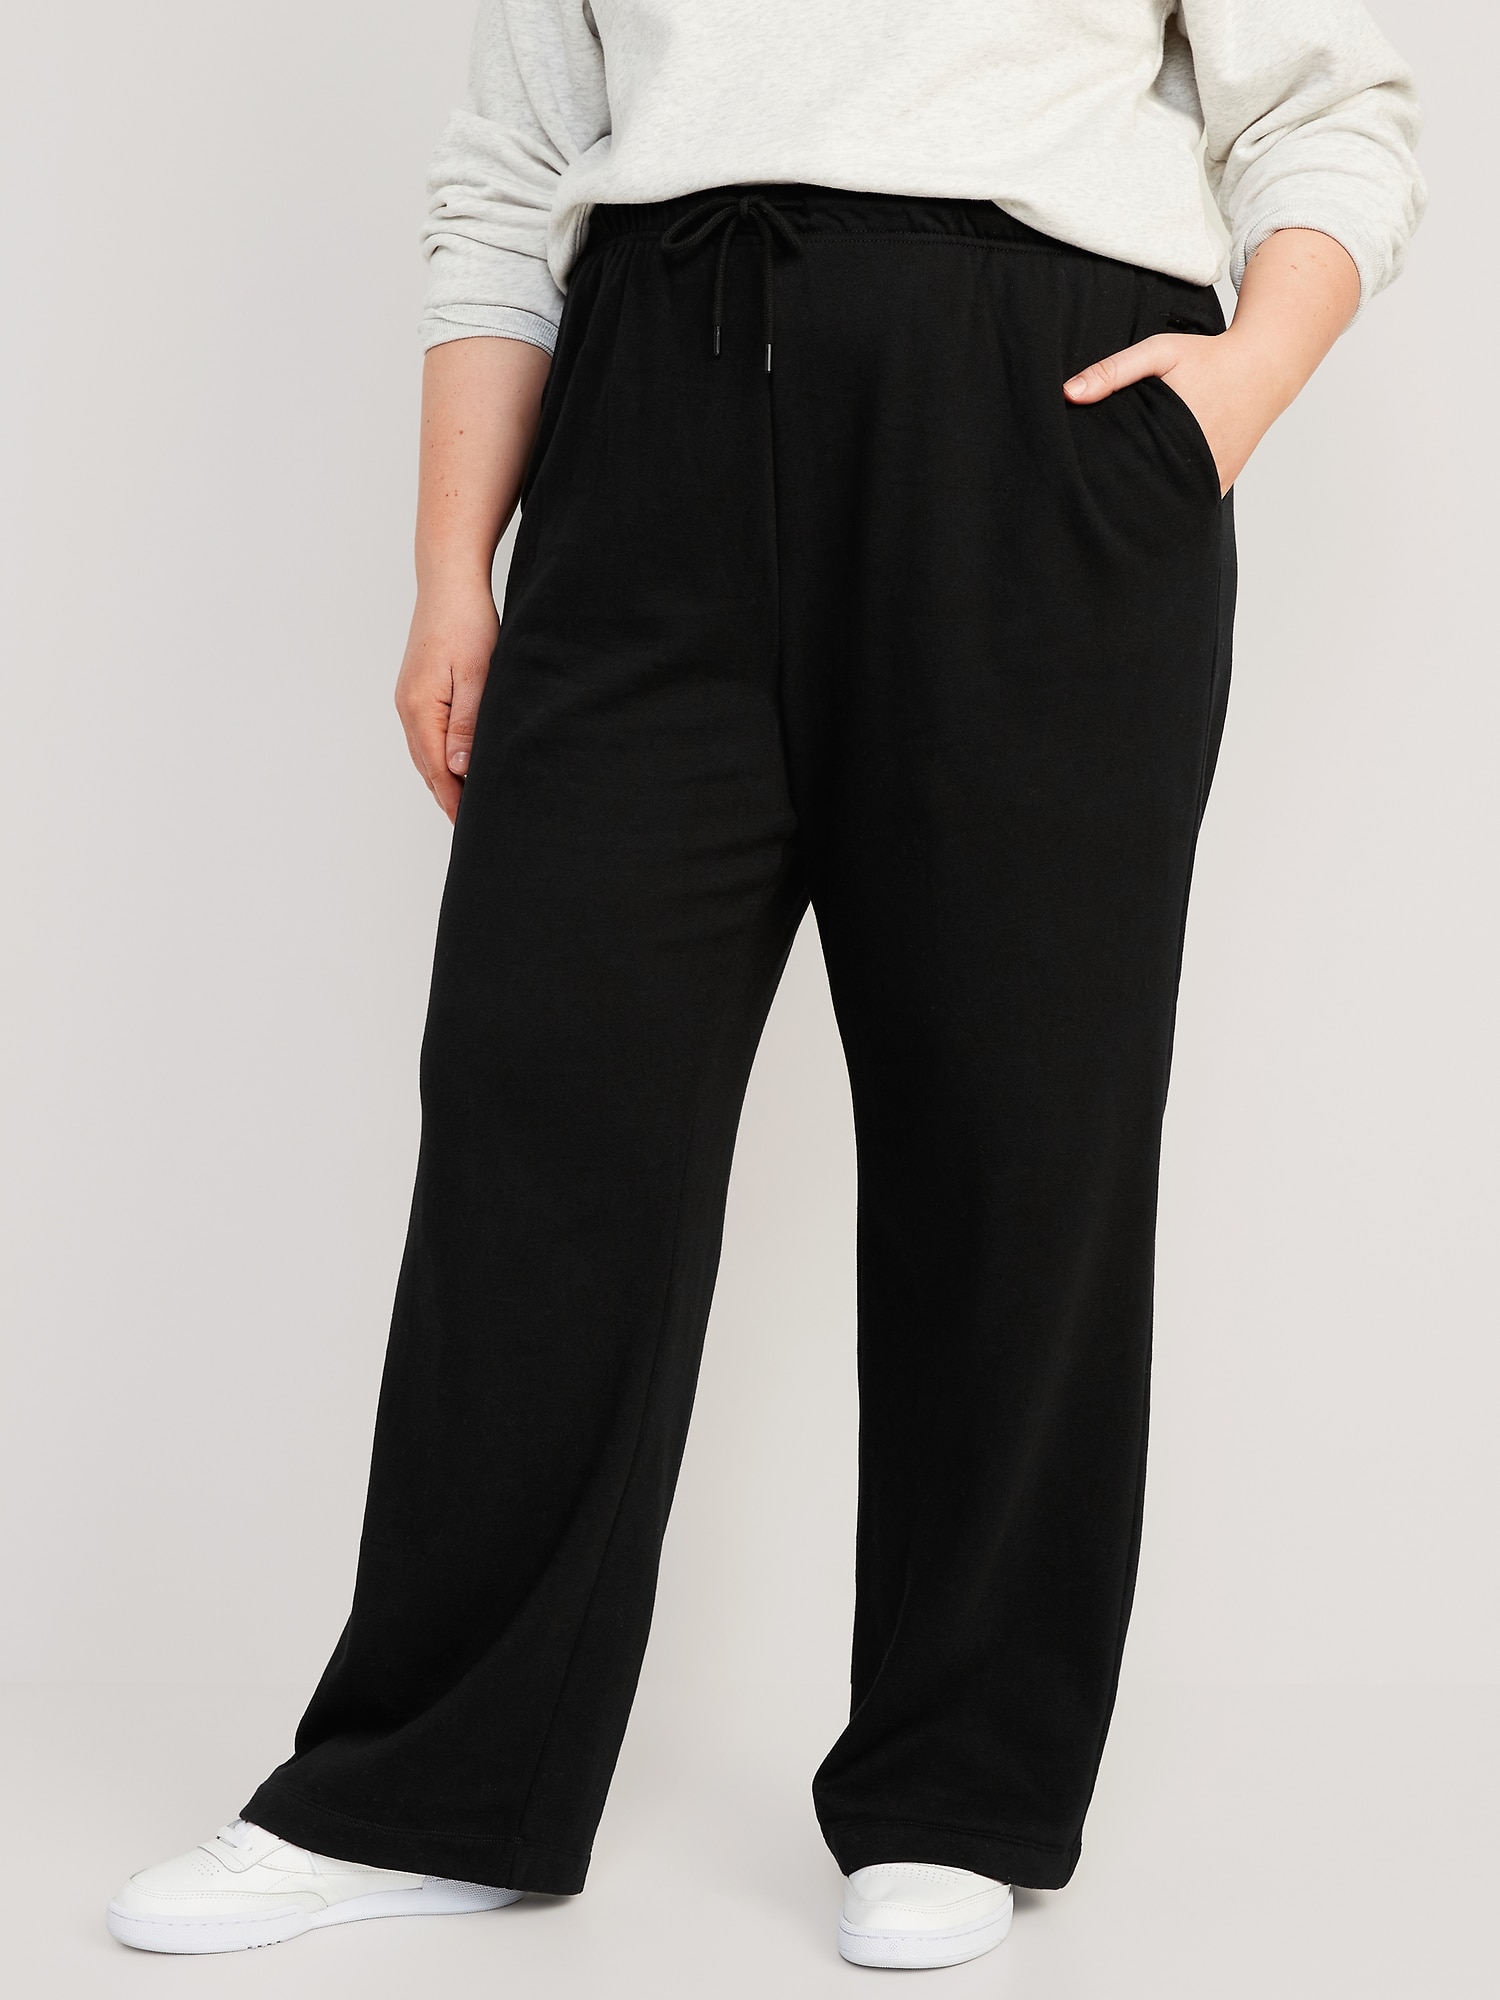 | Old High-Waisted Navy Vintage for Extra Sweatpants Women